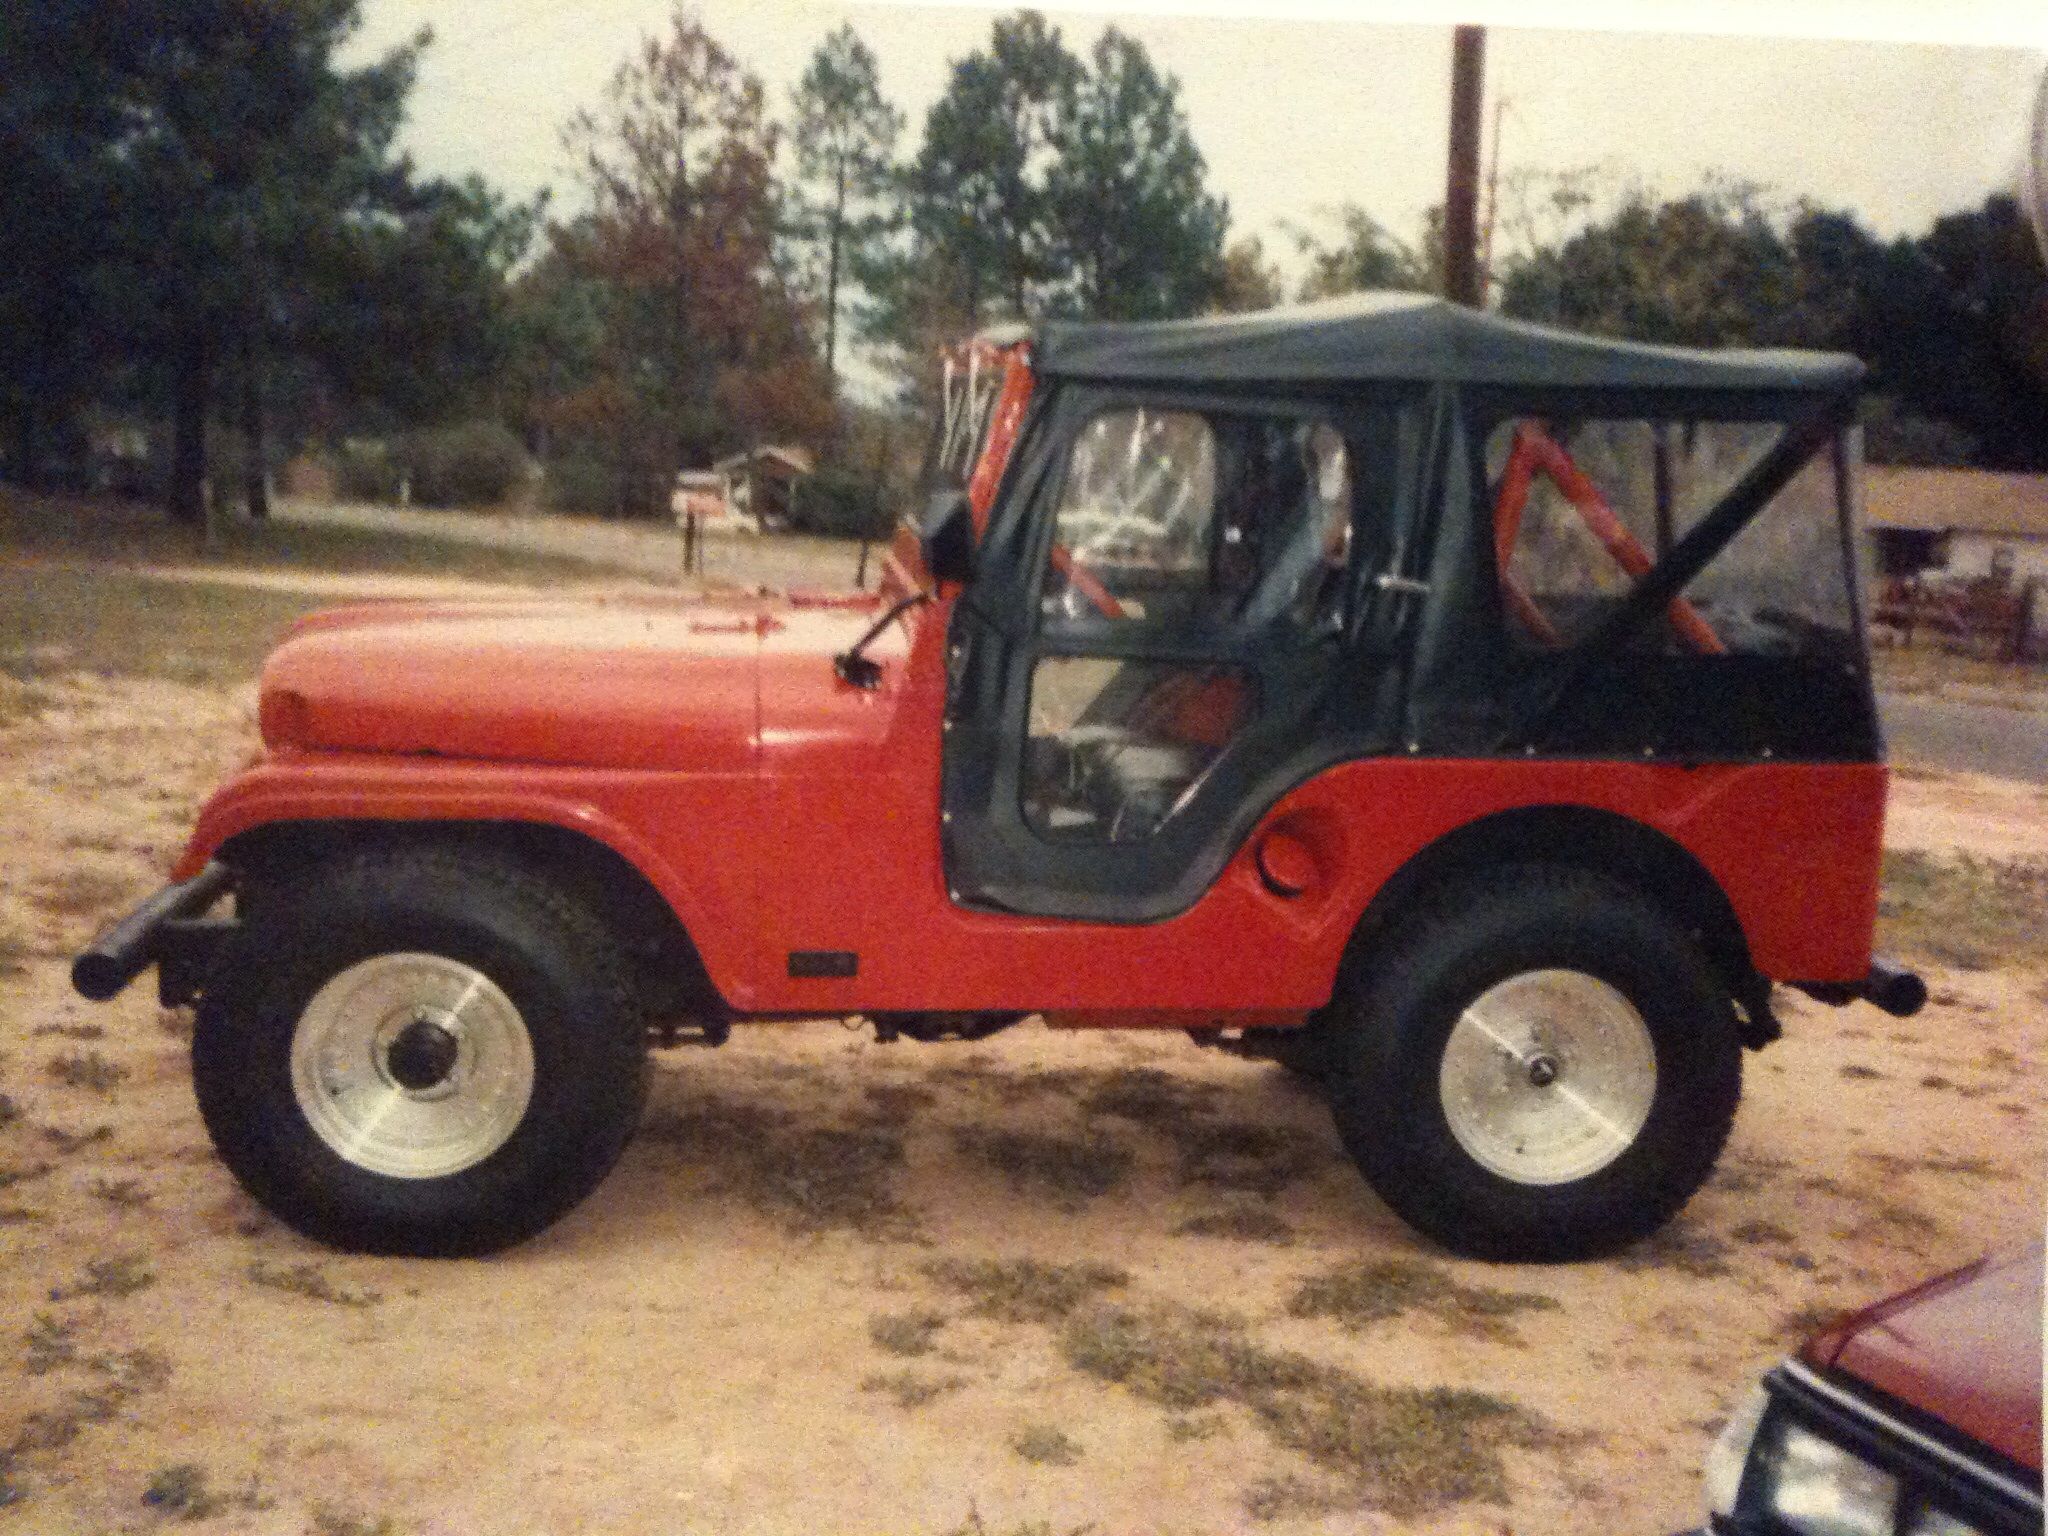 1991 - Troy, AL - My 1955 Willys Jeep after some upgrading. Added a fuse panel, electric wipers, soft top, new paint, recovered seats, carpeting, Cent